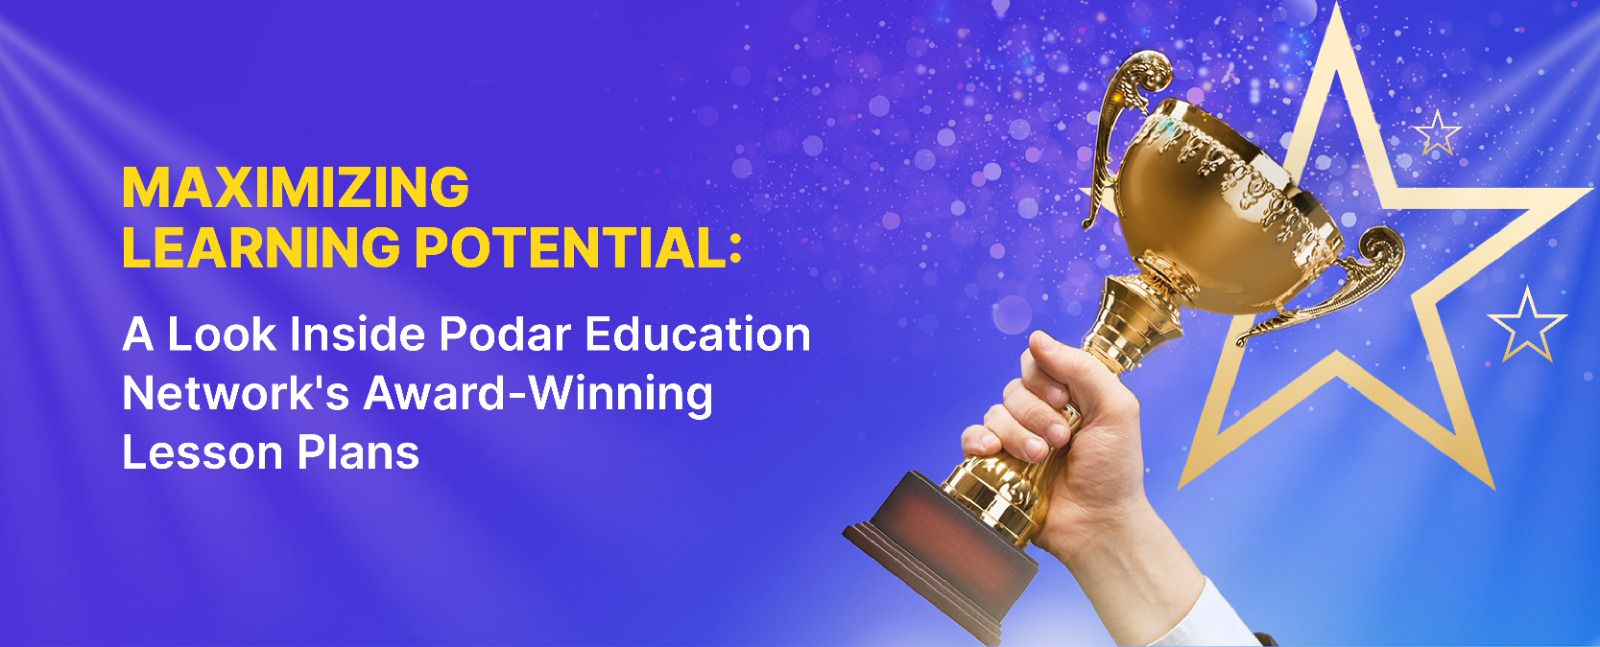 Maximizing Learning Potential: A Look Inside Podar Education Network's Award-Winning Lesson Plans